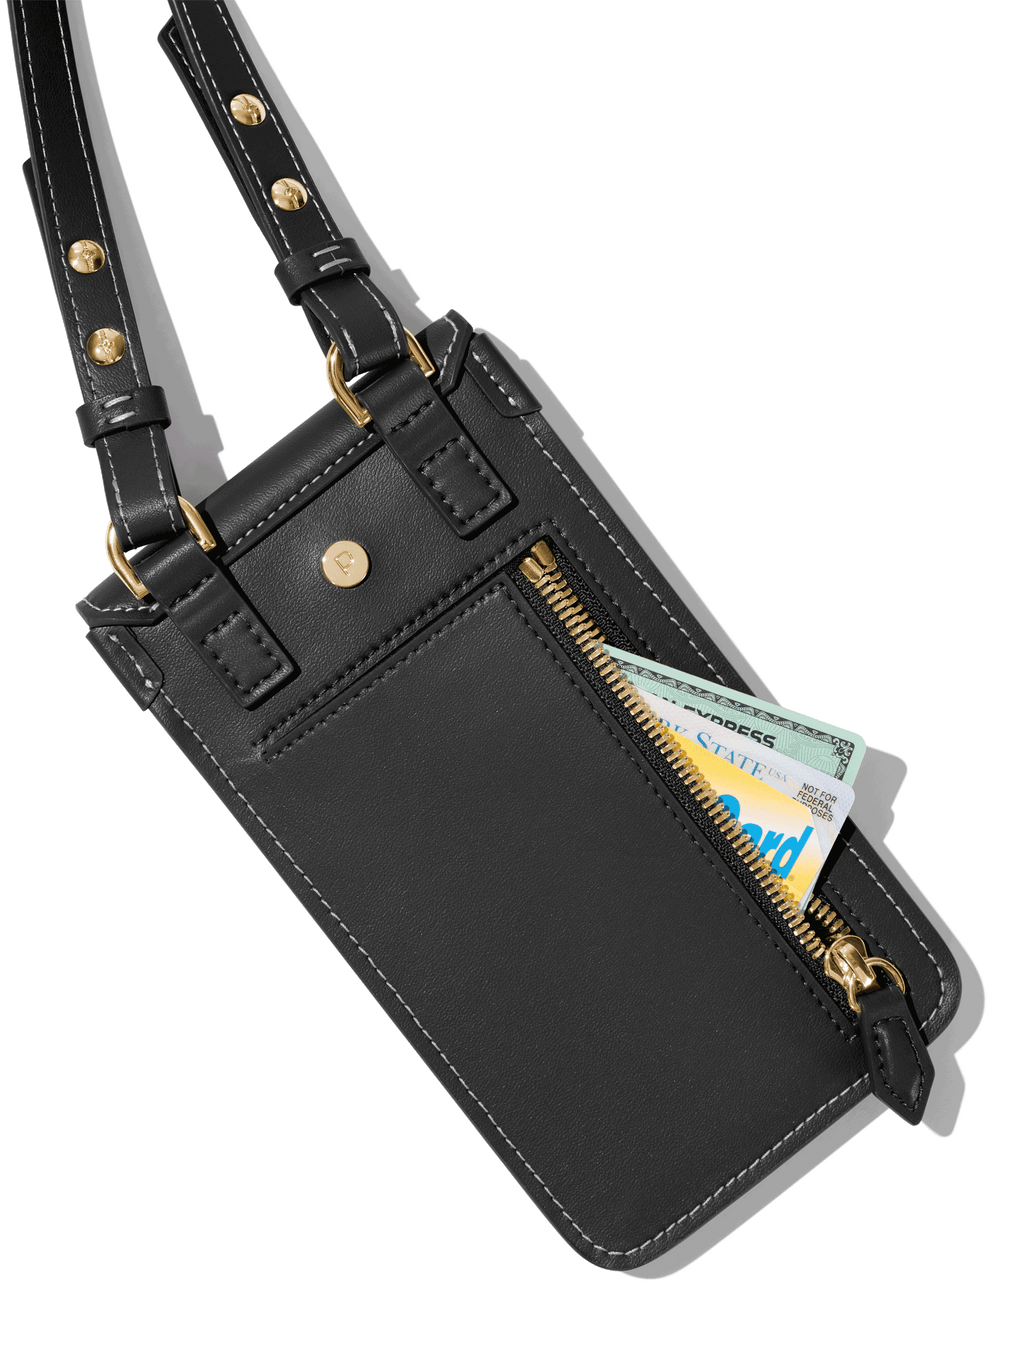 Personalized Black Leather Flight Bag Cross Body Bag for Men -  Norway